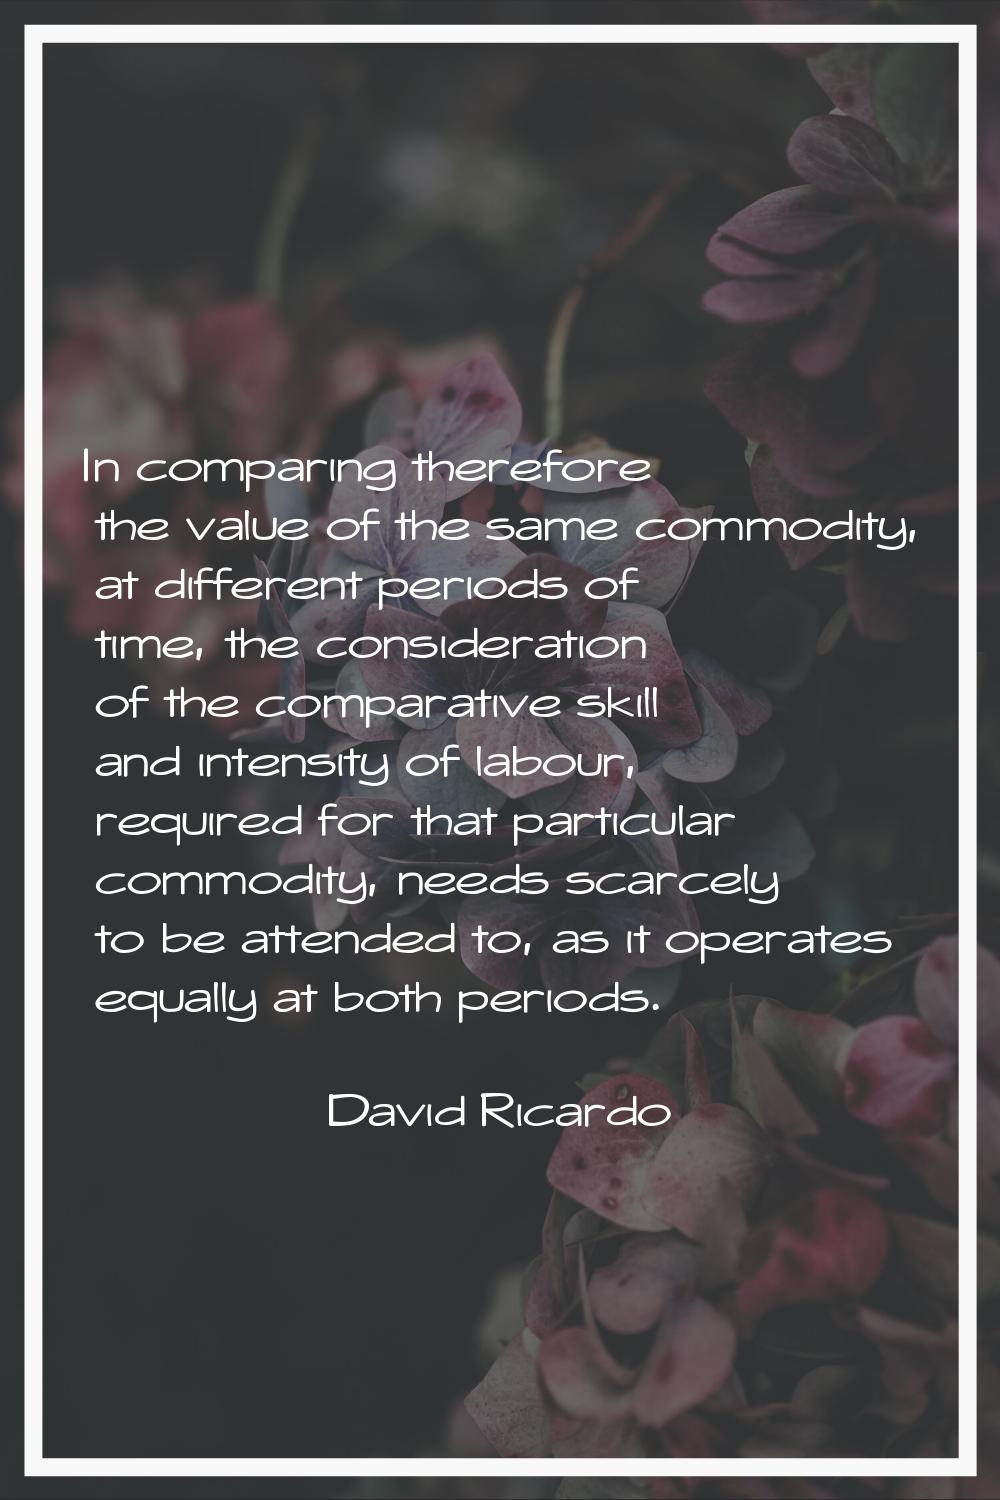 In comparing therefore the value of the same commodity, at different periods of time, the considera